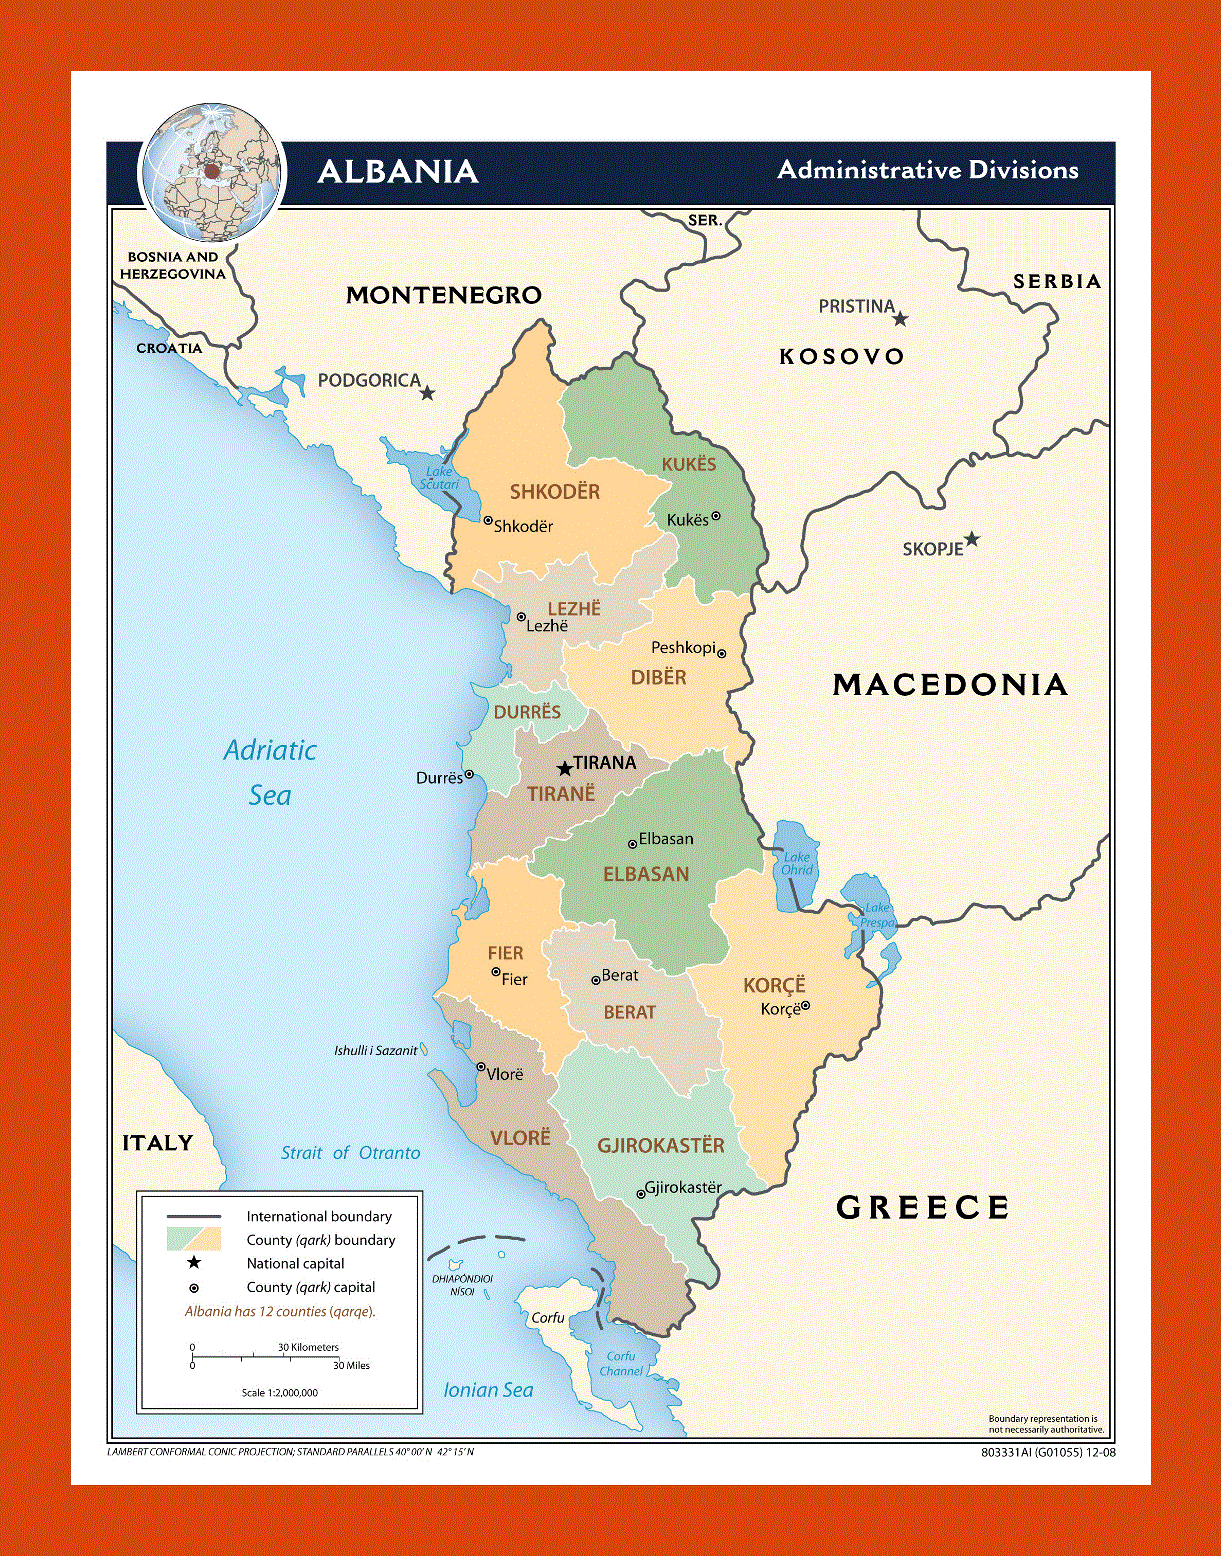 Administrative divisions map of Albania - 2008